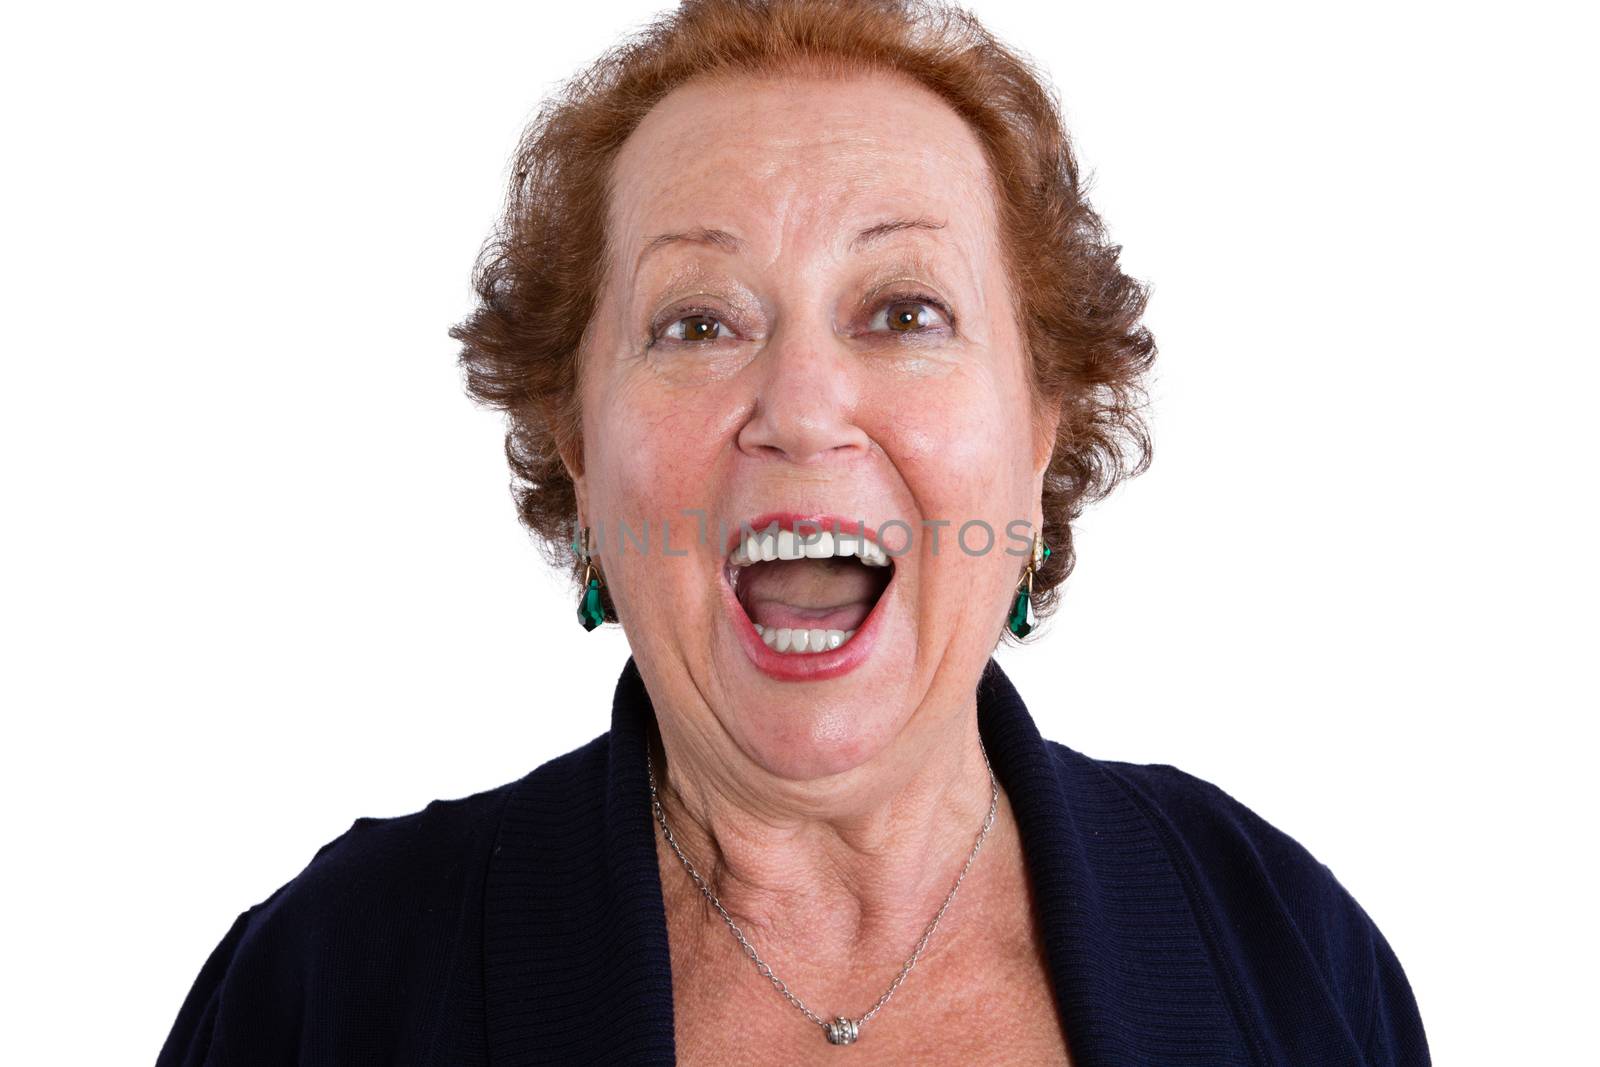 Close up Shocked Face of a Senior Woman Looking at the Camera with Mouth Wide Open, Isolated on White Background.